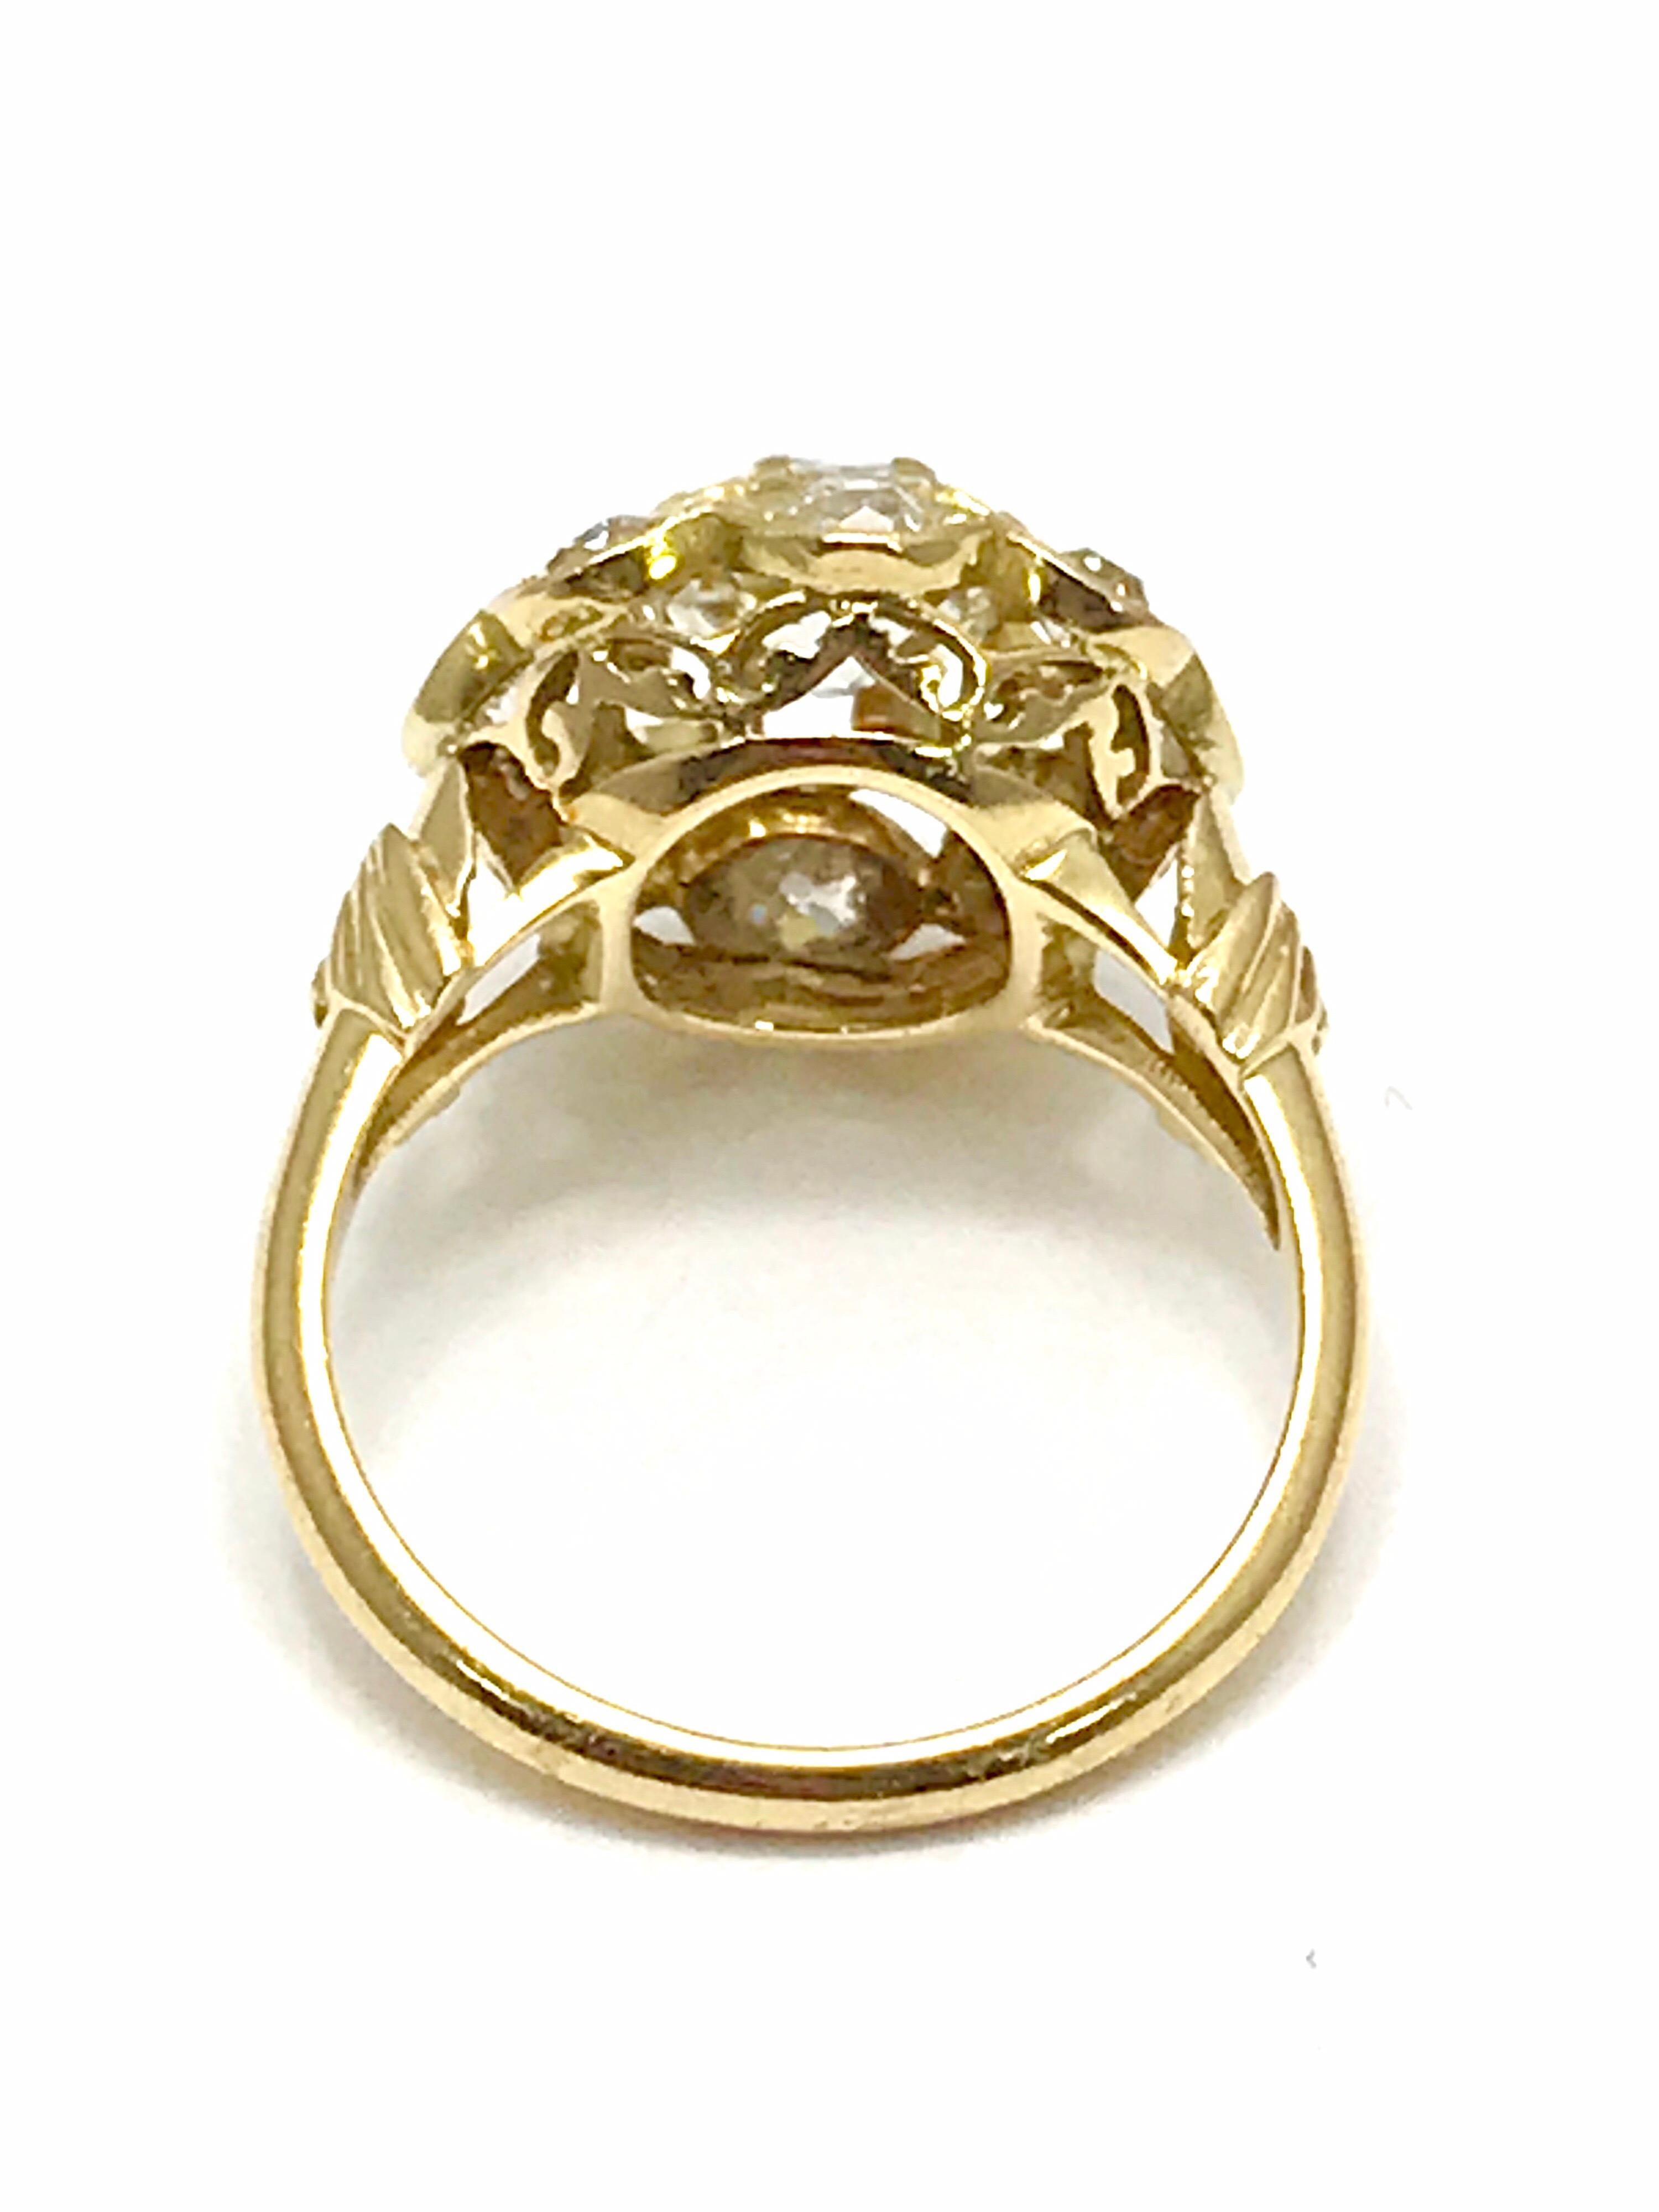 1.29 Carat Old Mine Cut Diamond and 18 Karat Gold Engagement or Fashion Ring In Good Condition For Sale In Chevy Chase, MD